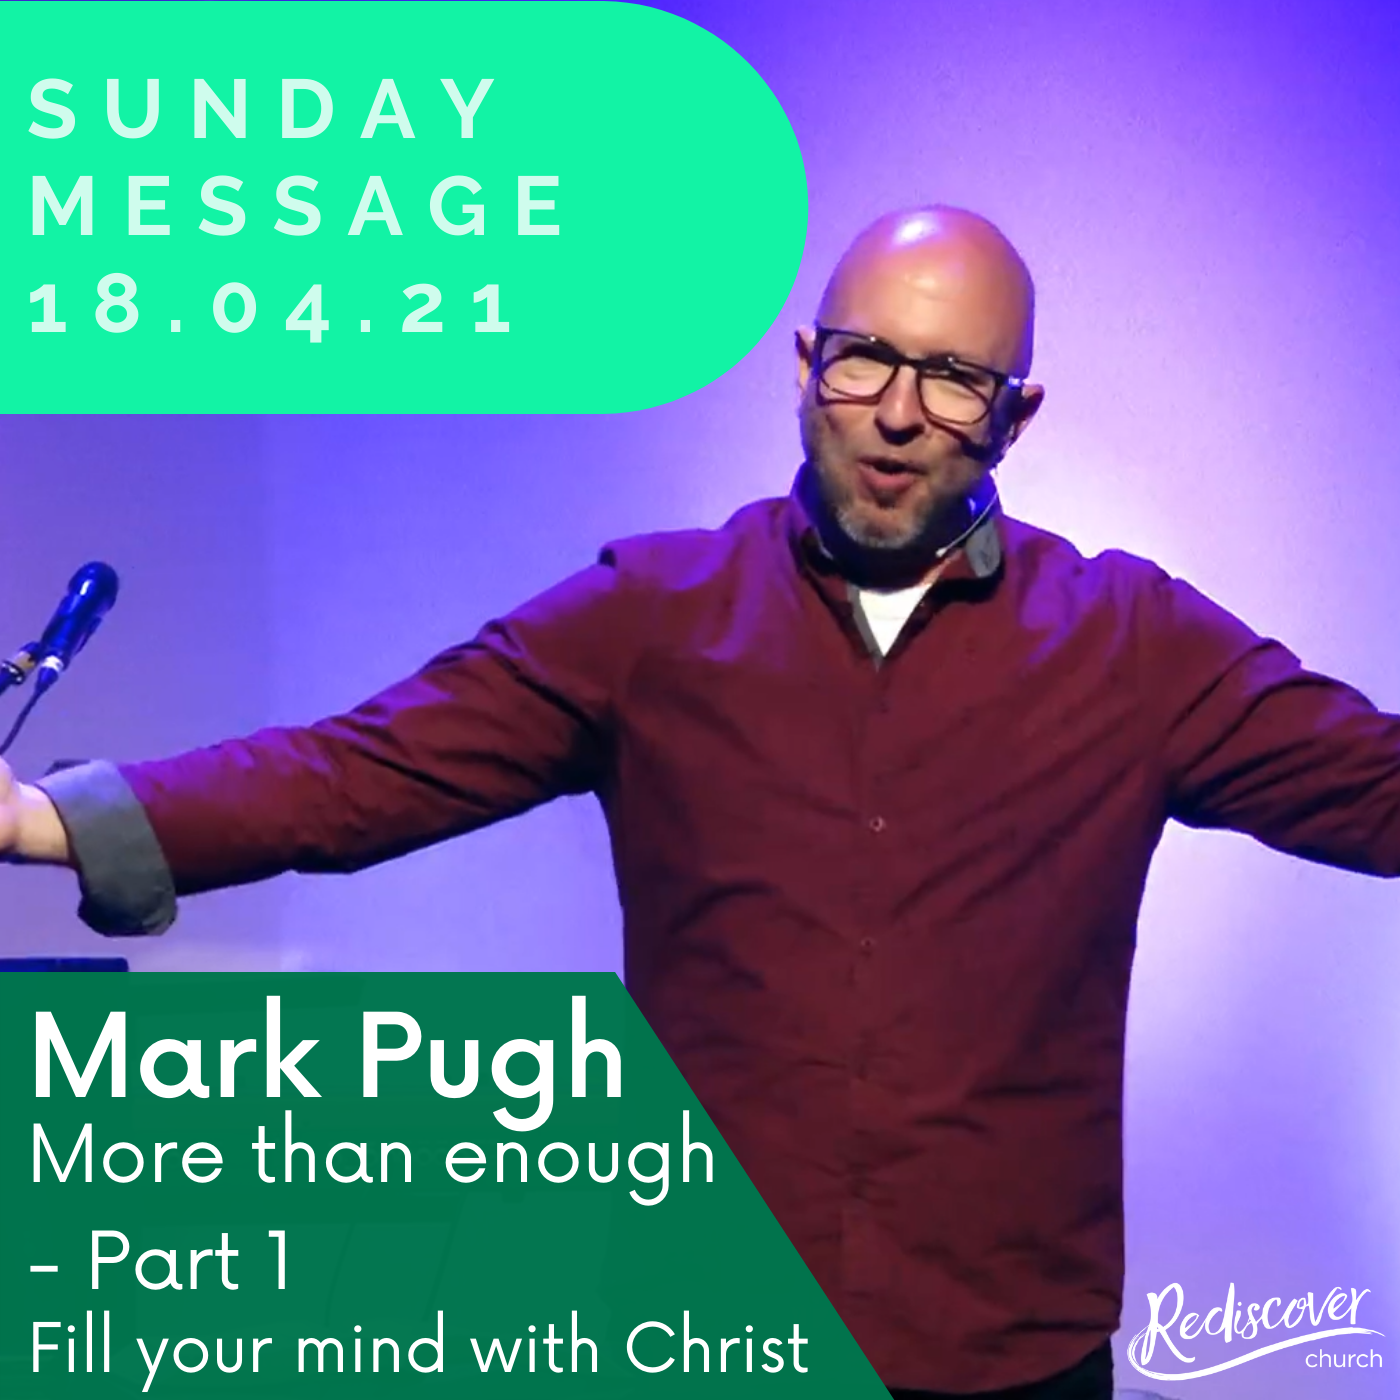 Mark Pugh - Sunday Message | More than enough - Part 1 | Fill your mind with Christ